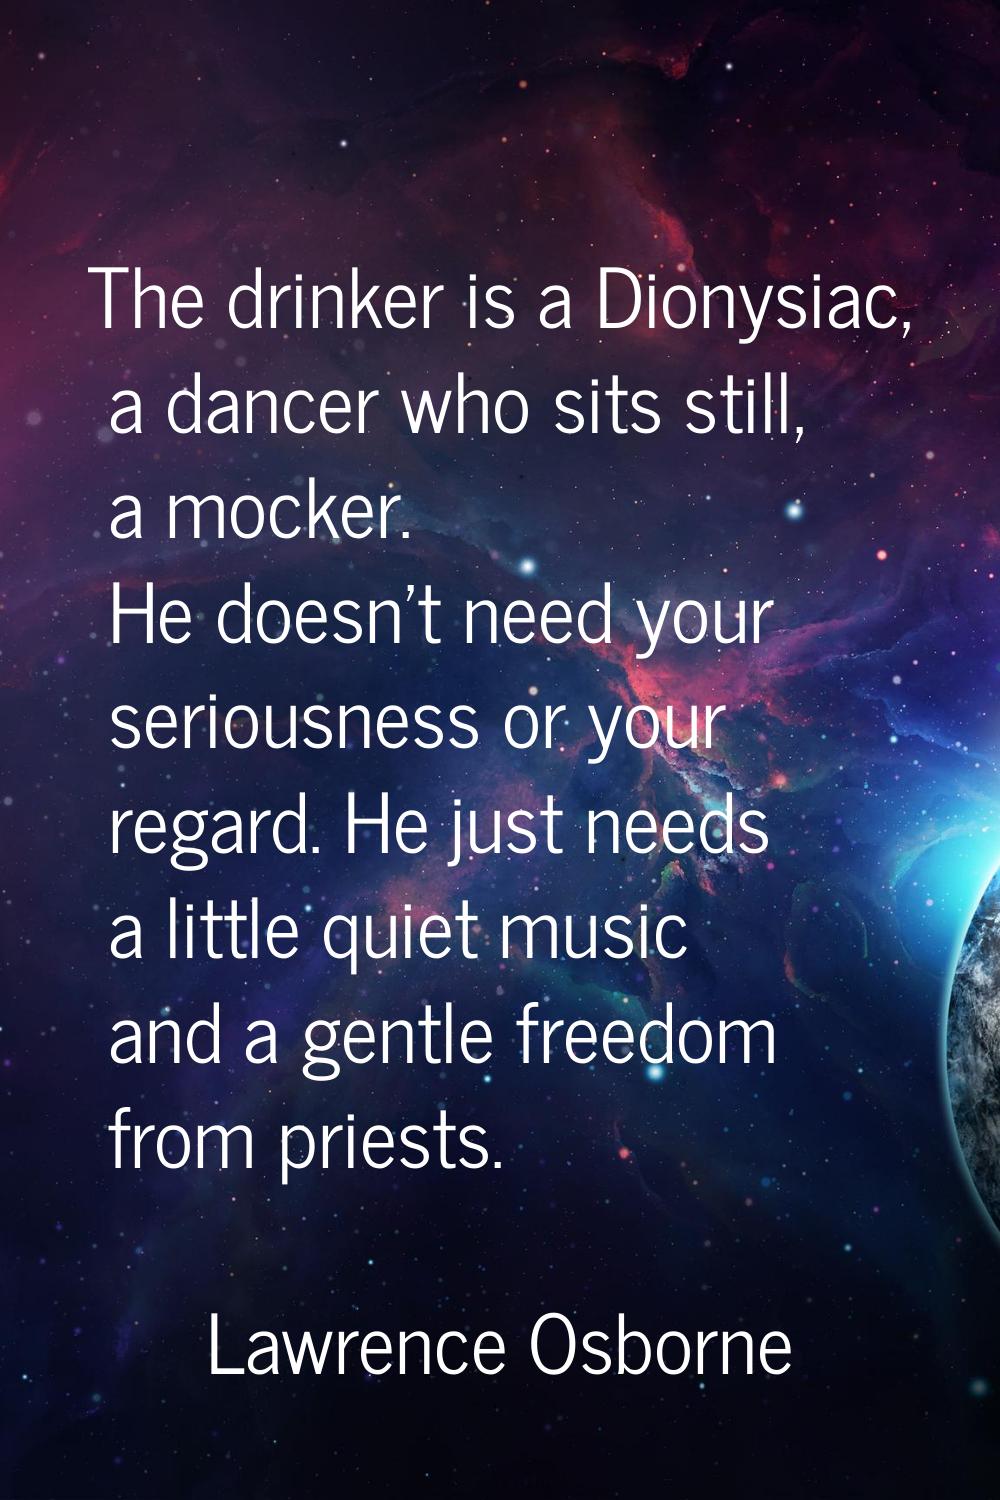 The drinker is a Dionysiac, a dancer who sits still, a mocker. He doesn't need your seriousness or 